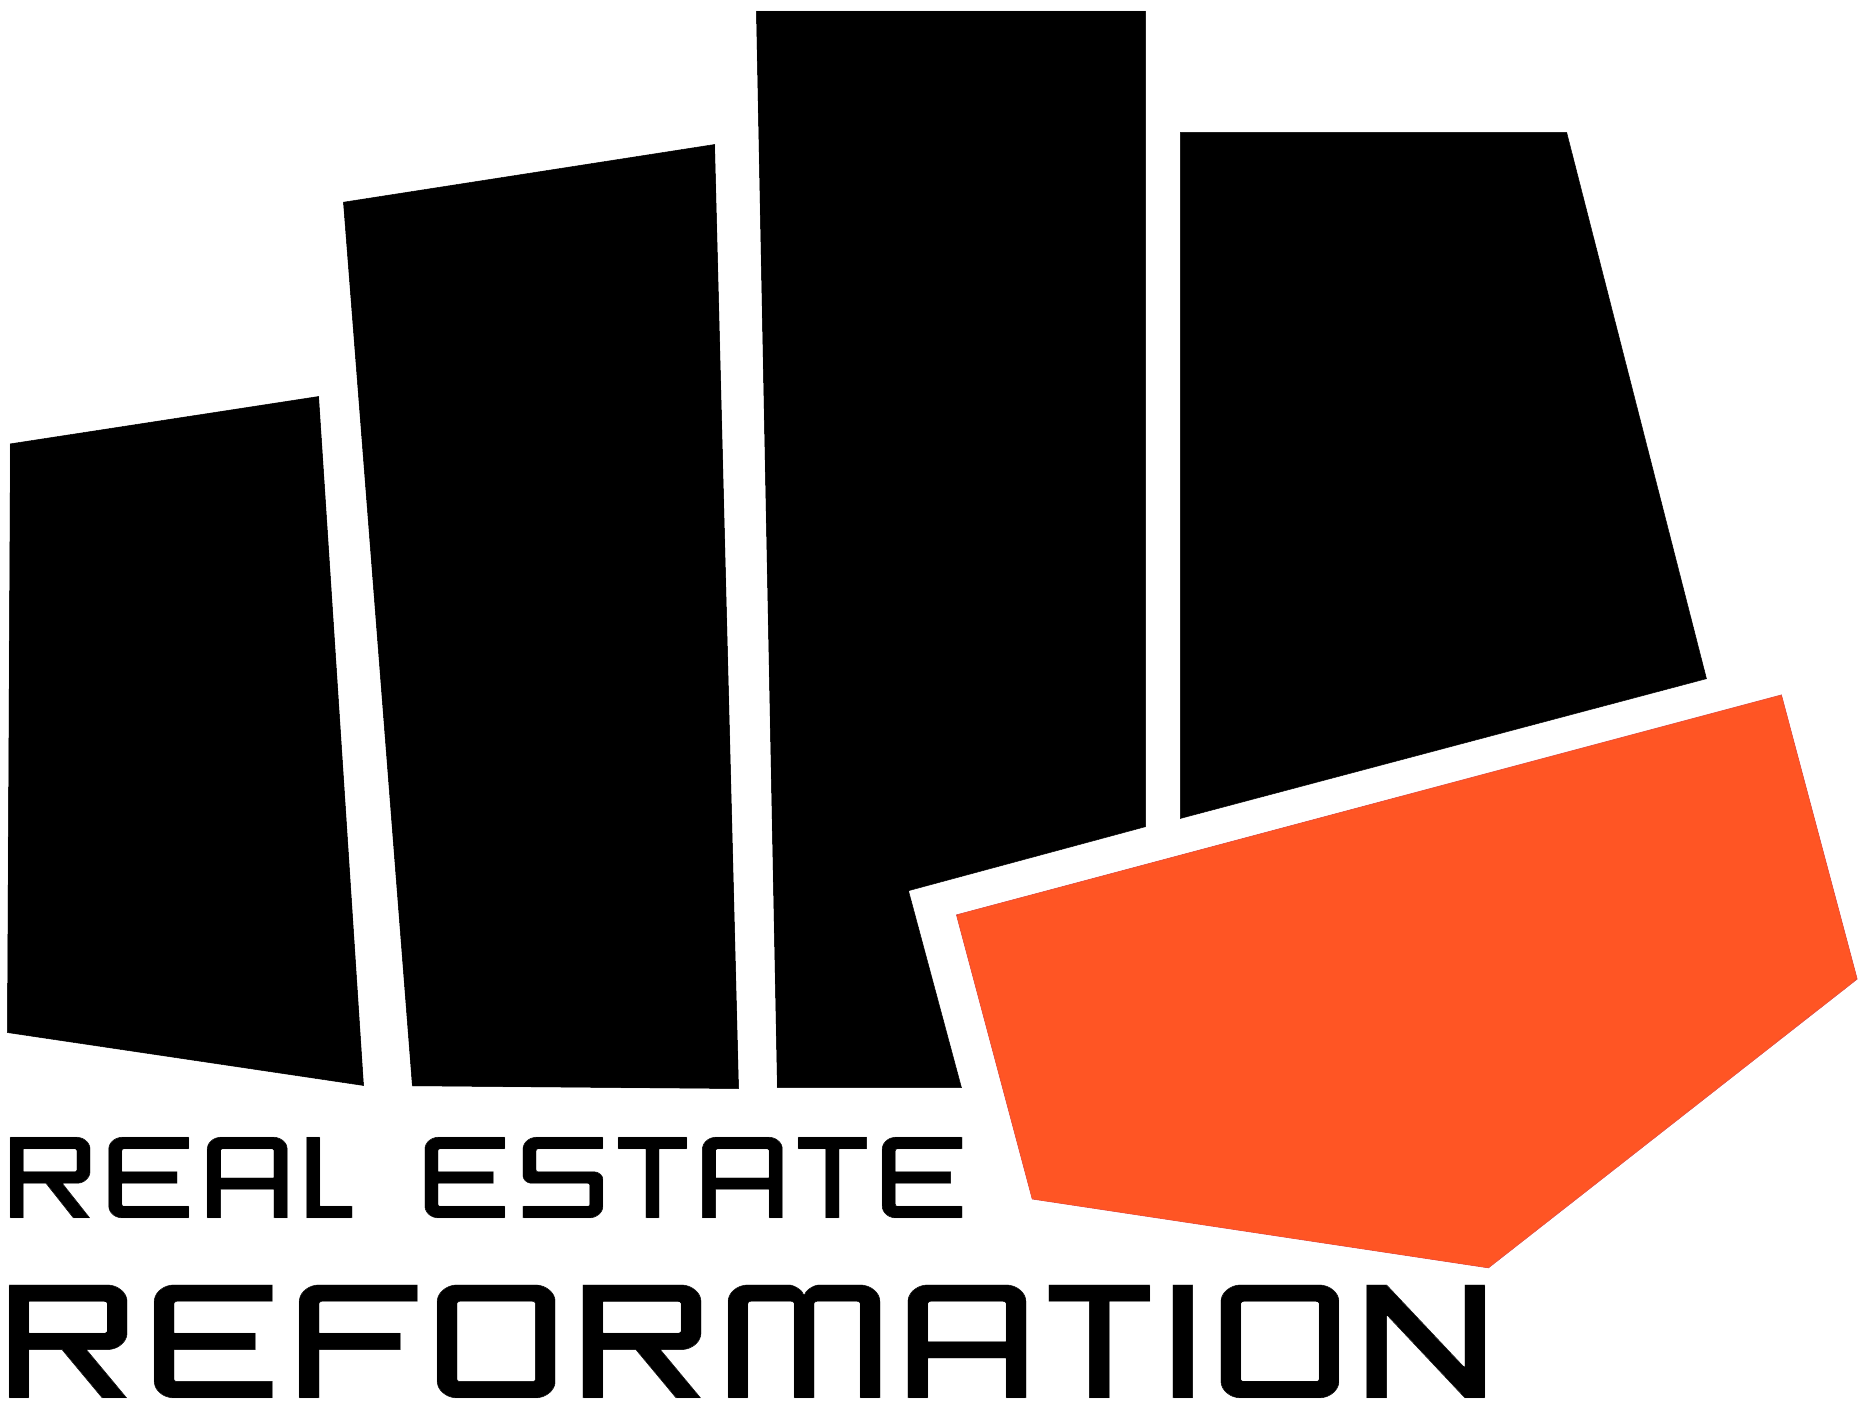 Logo of Real Estate Reformation featuring stylized black skyscrapers with a orange protective shield at the base.